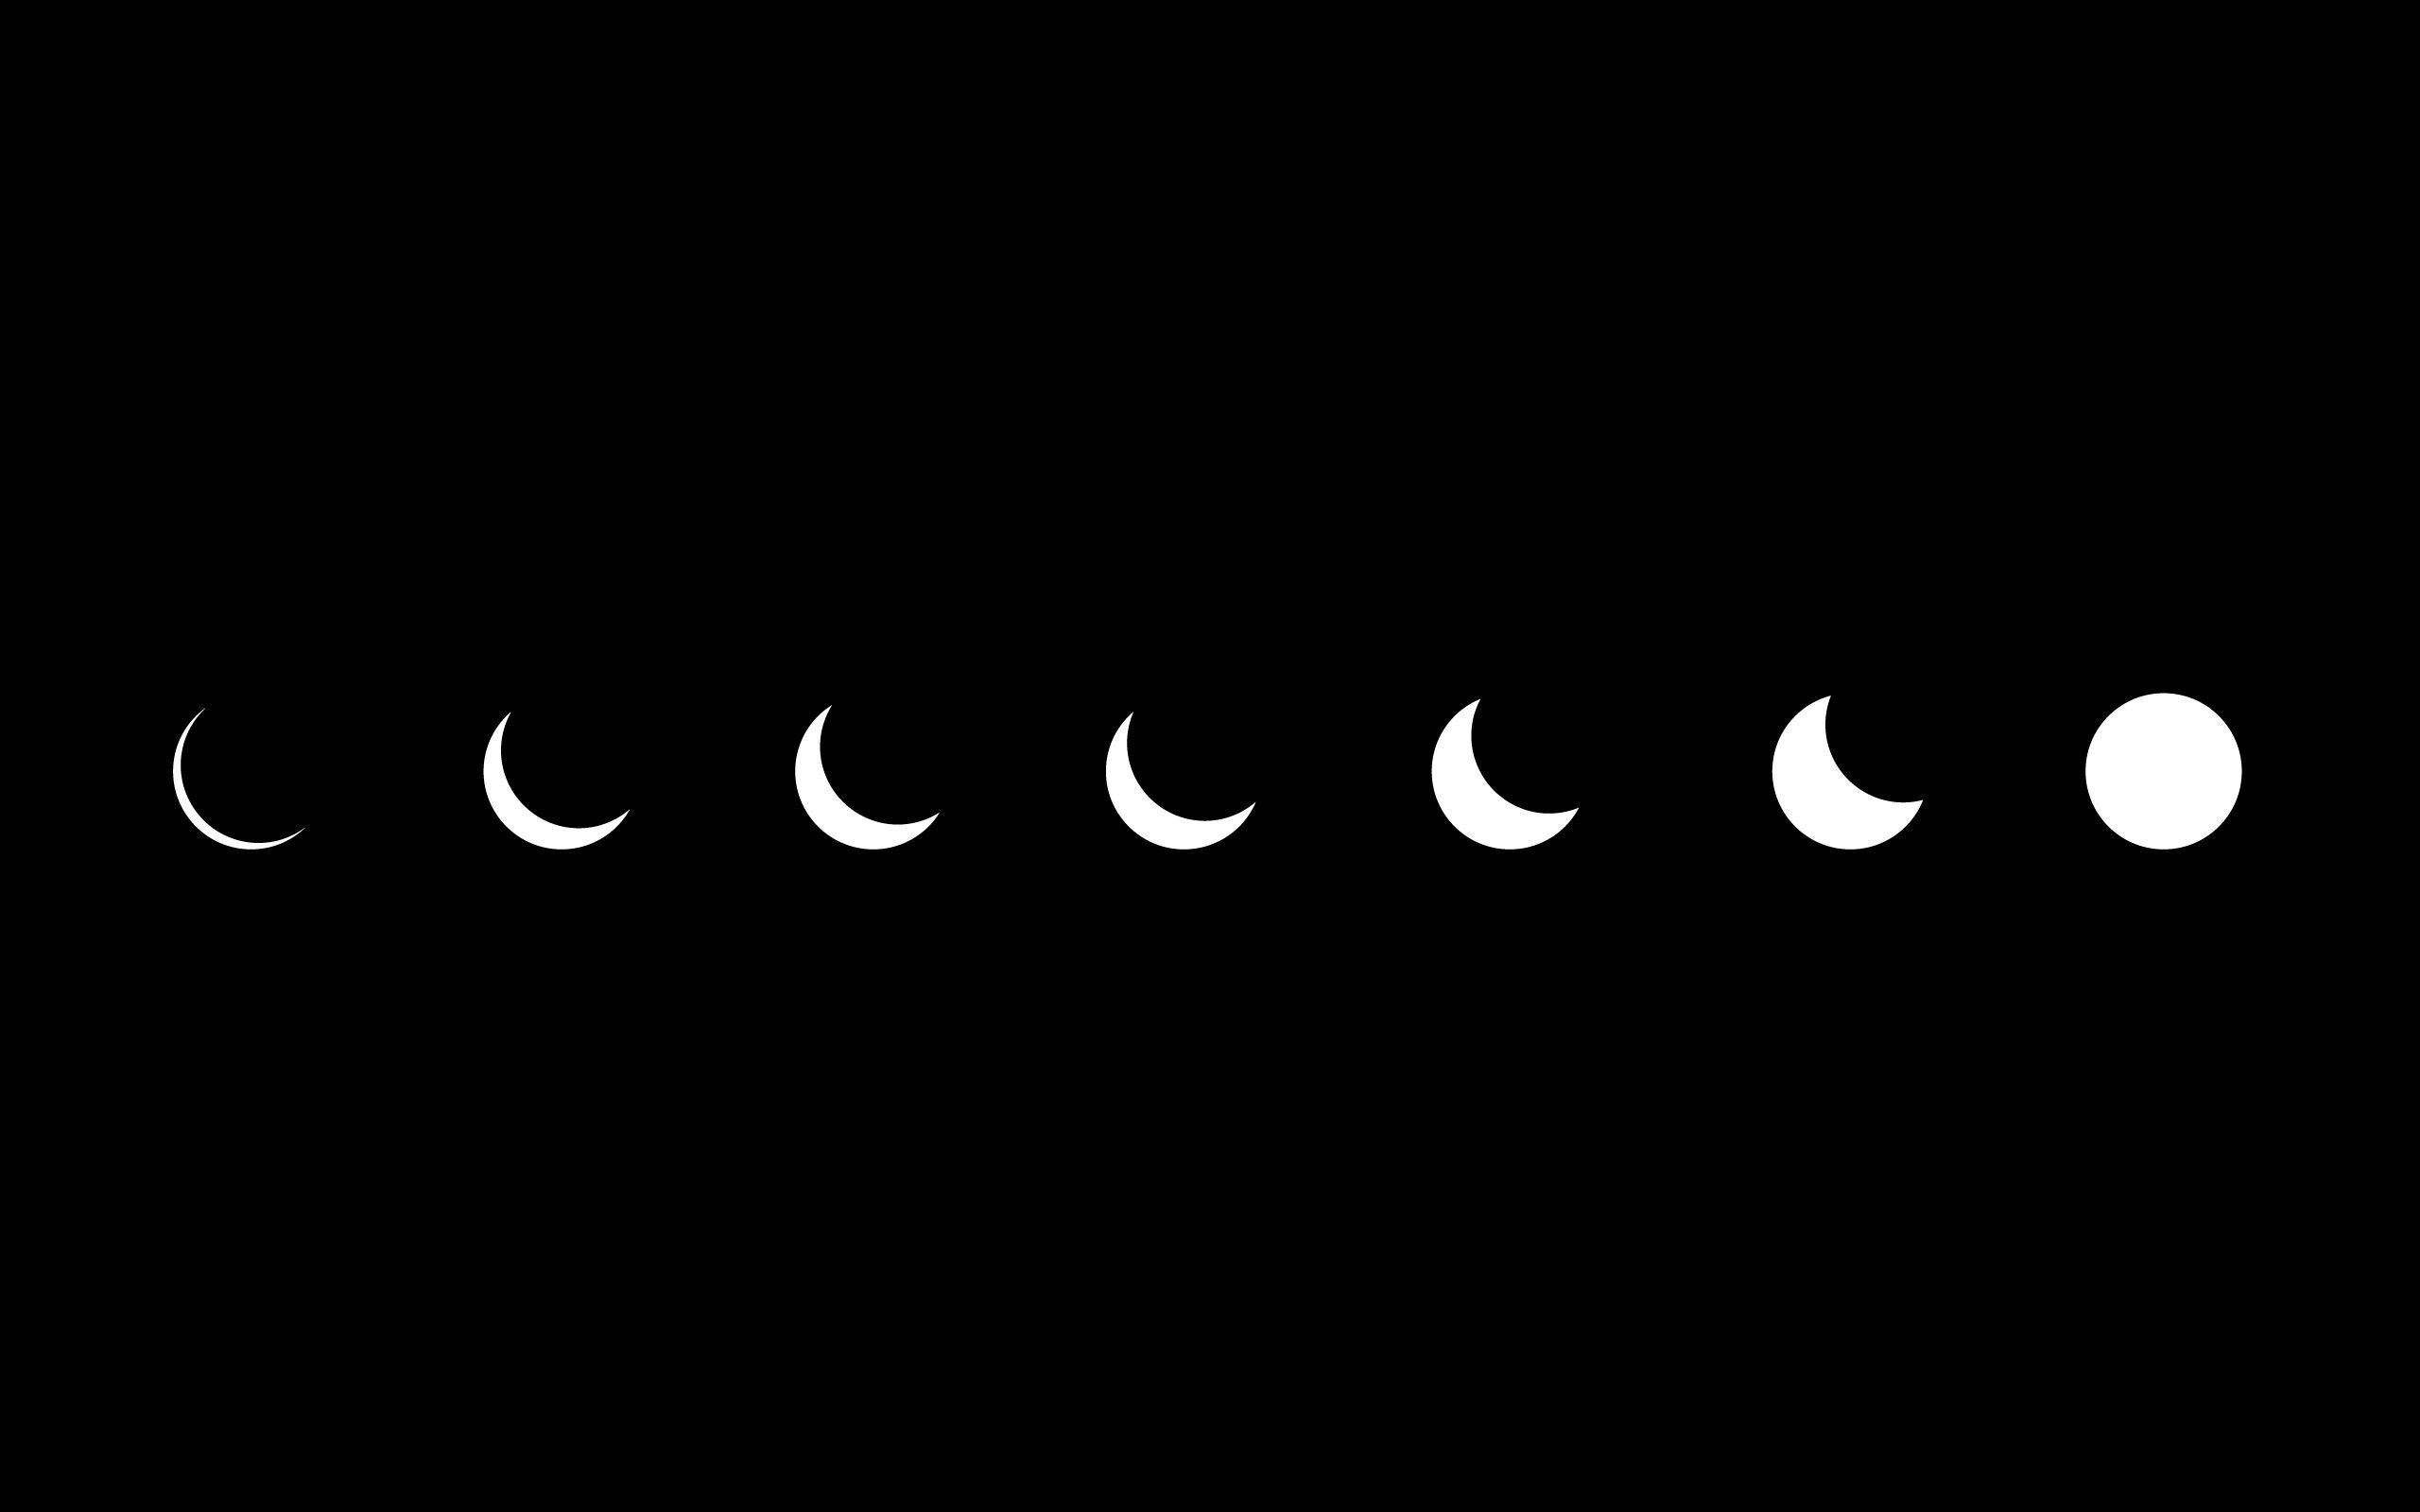 The phases of a moon in black and white - Desktop, emo, computer, dark, black, moon, simple, clean